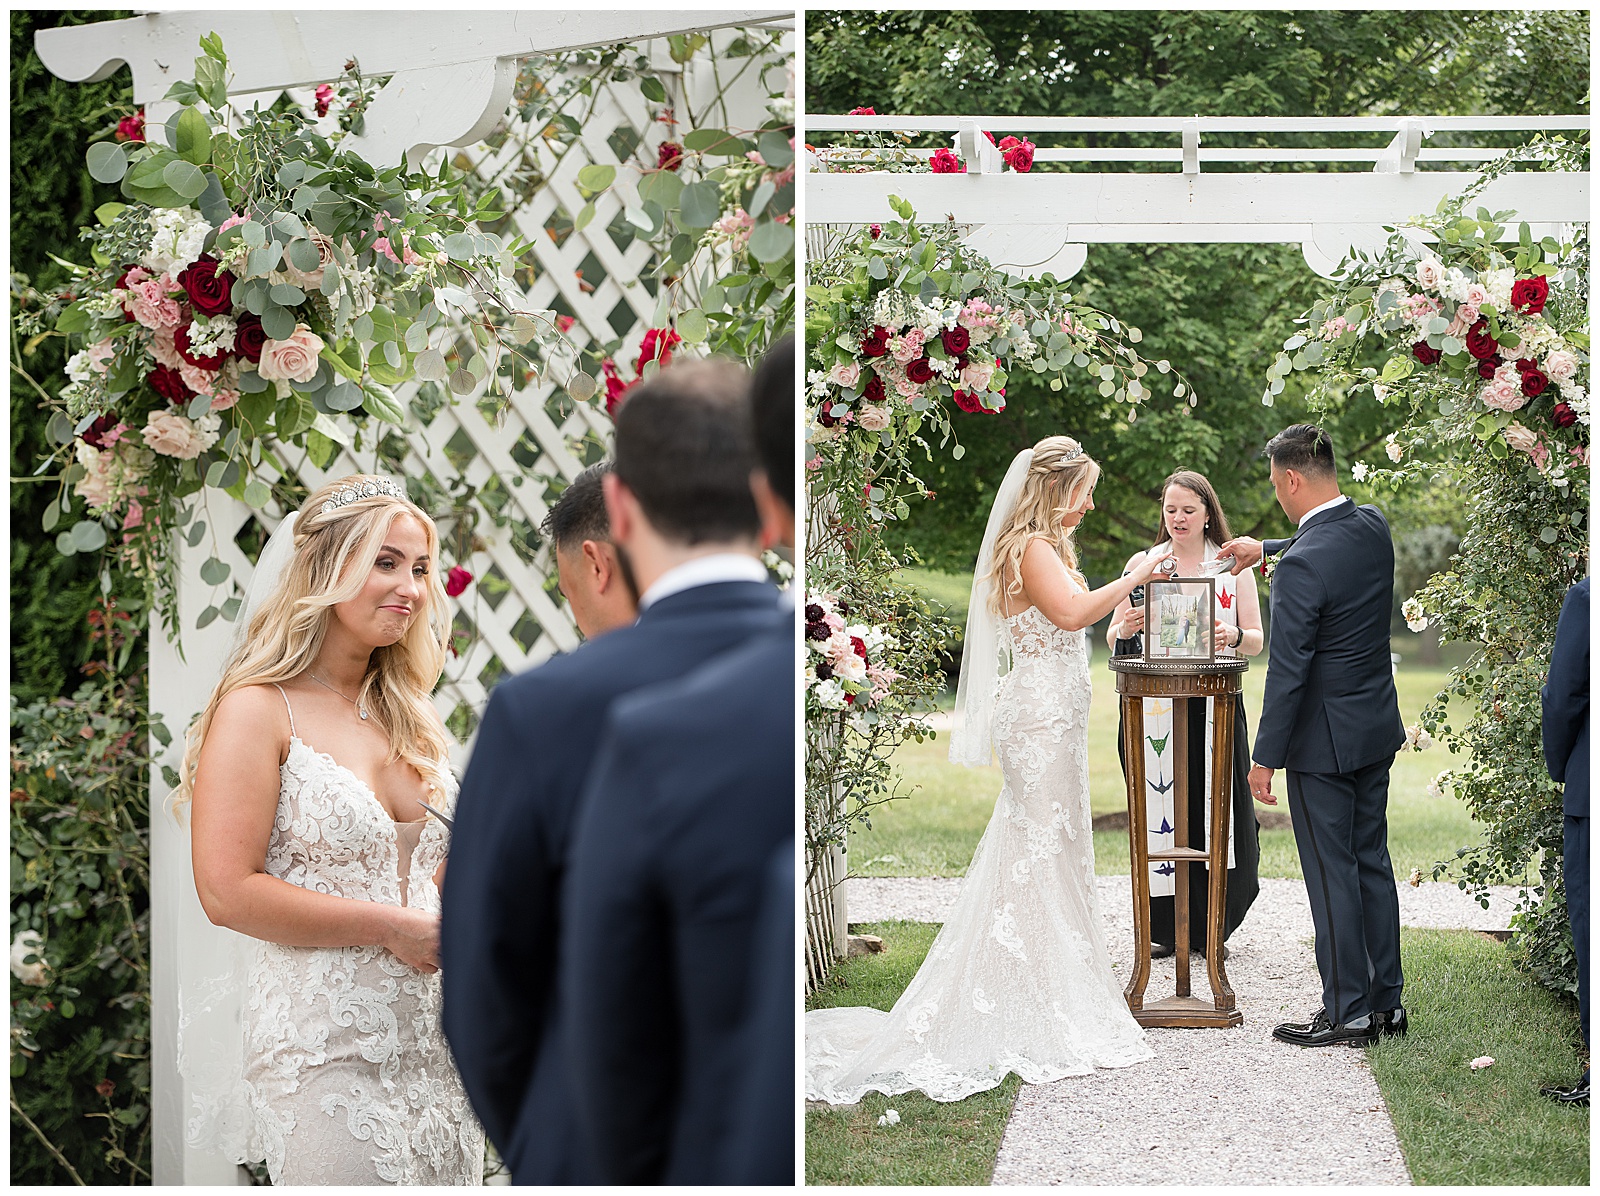 bride and groom exchanging wedding vowels at outdoor wedding ceremony surrounded by white archway and beautiful flowers